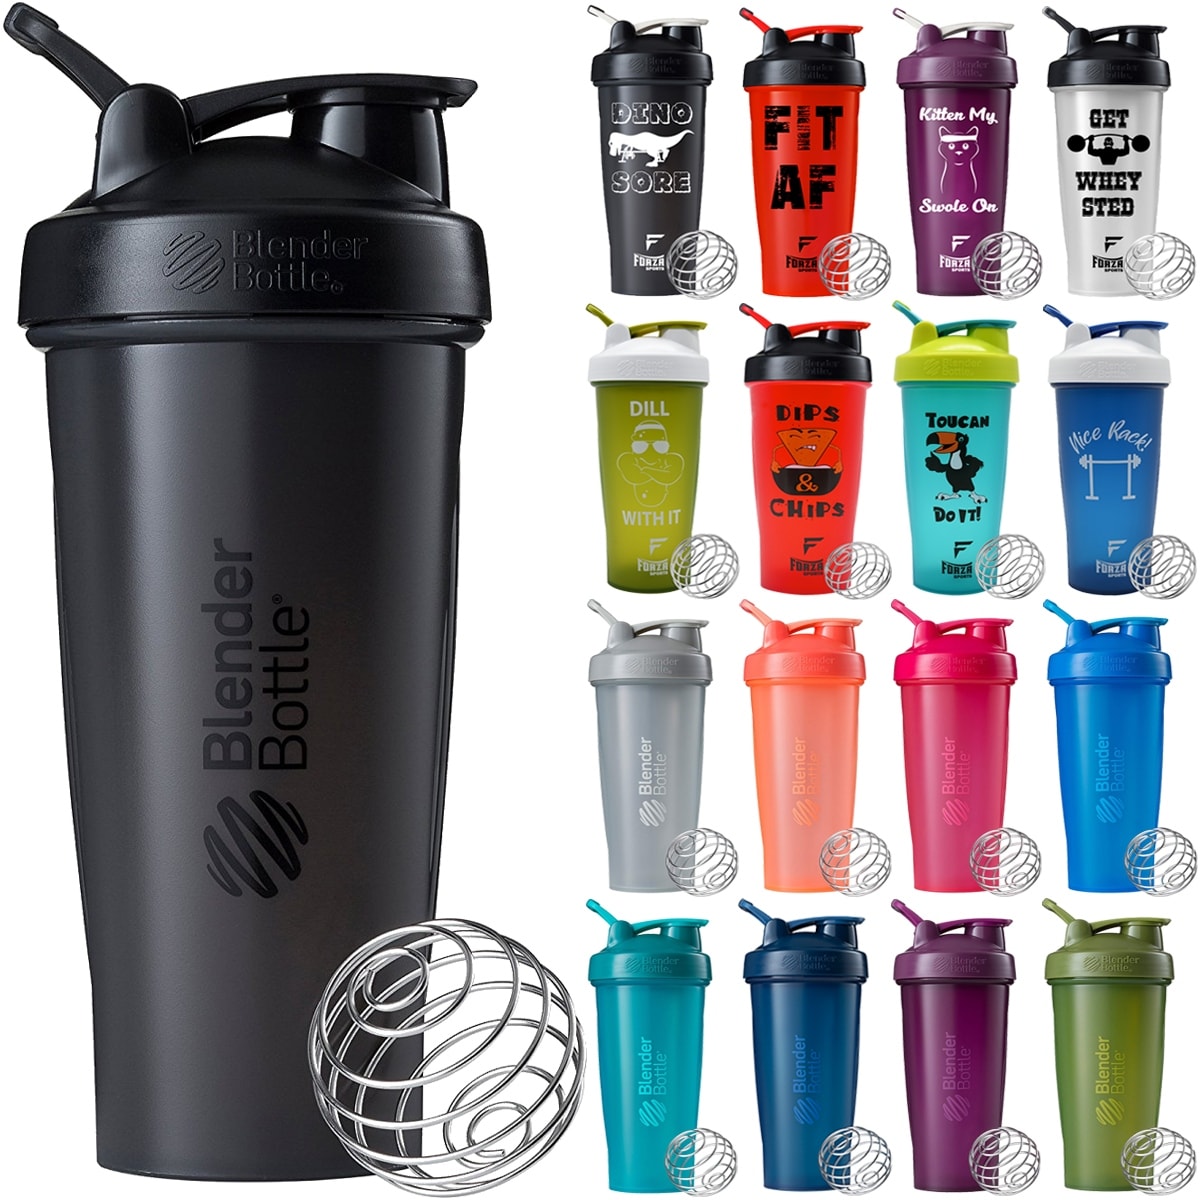 https://ak1.ostkcdn.com/images/products/is/images/direct/b3c3a56e0c5bec858086876258537deed2af7f5c/Blender-Bottle-Classic-28-oz.-Shaker-Mixer-Cup-with-Loop-Top.jpg